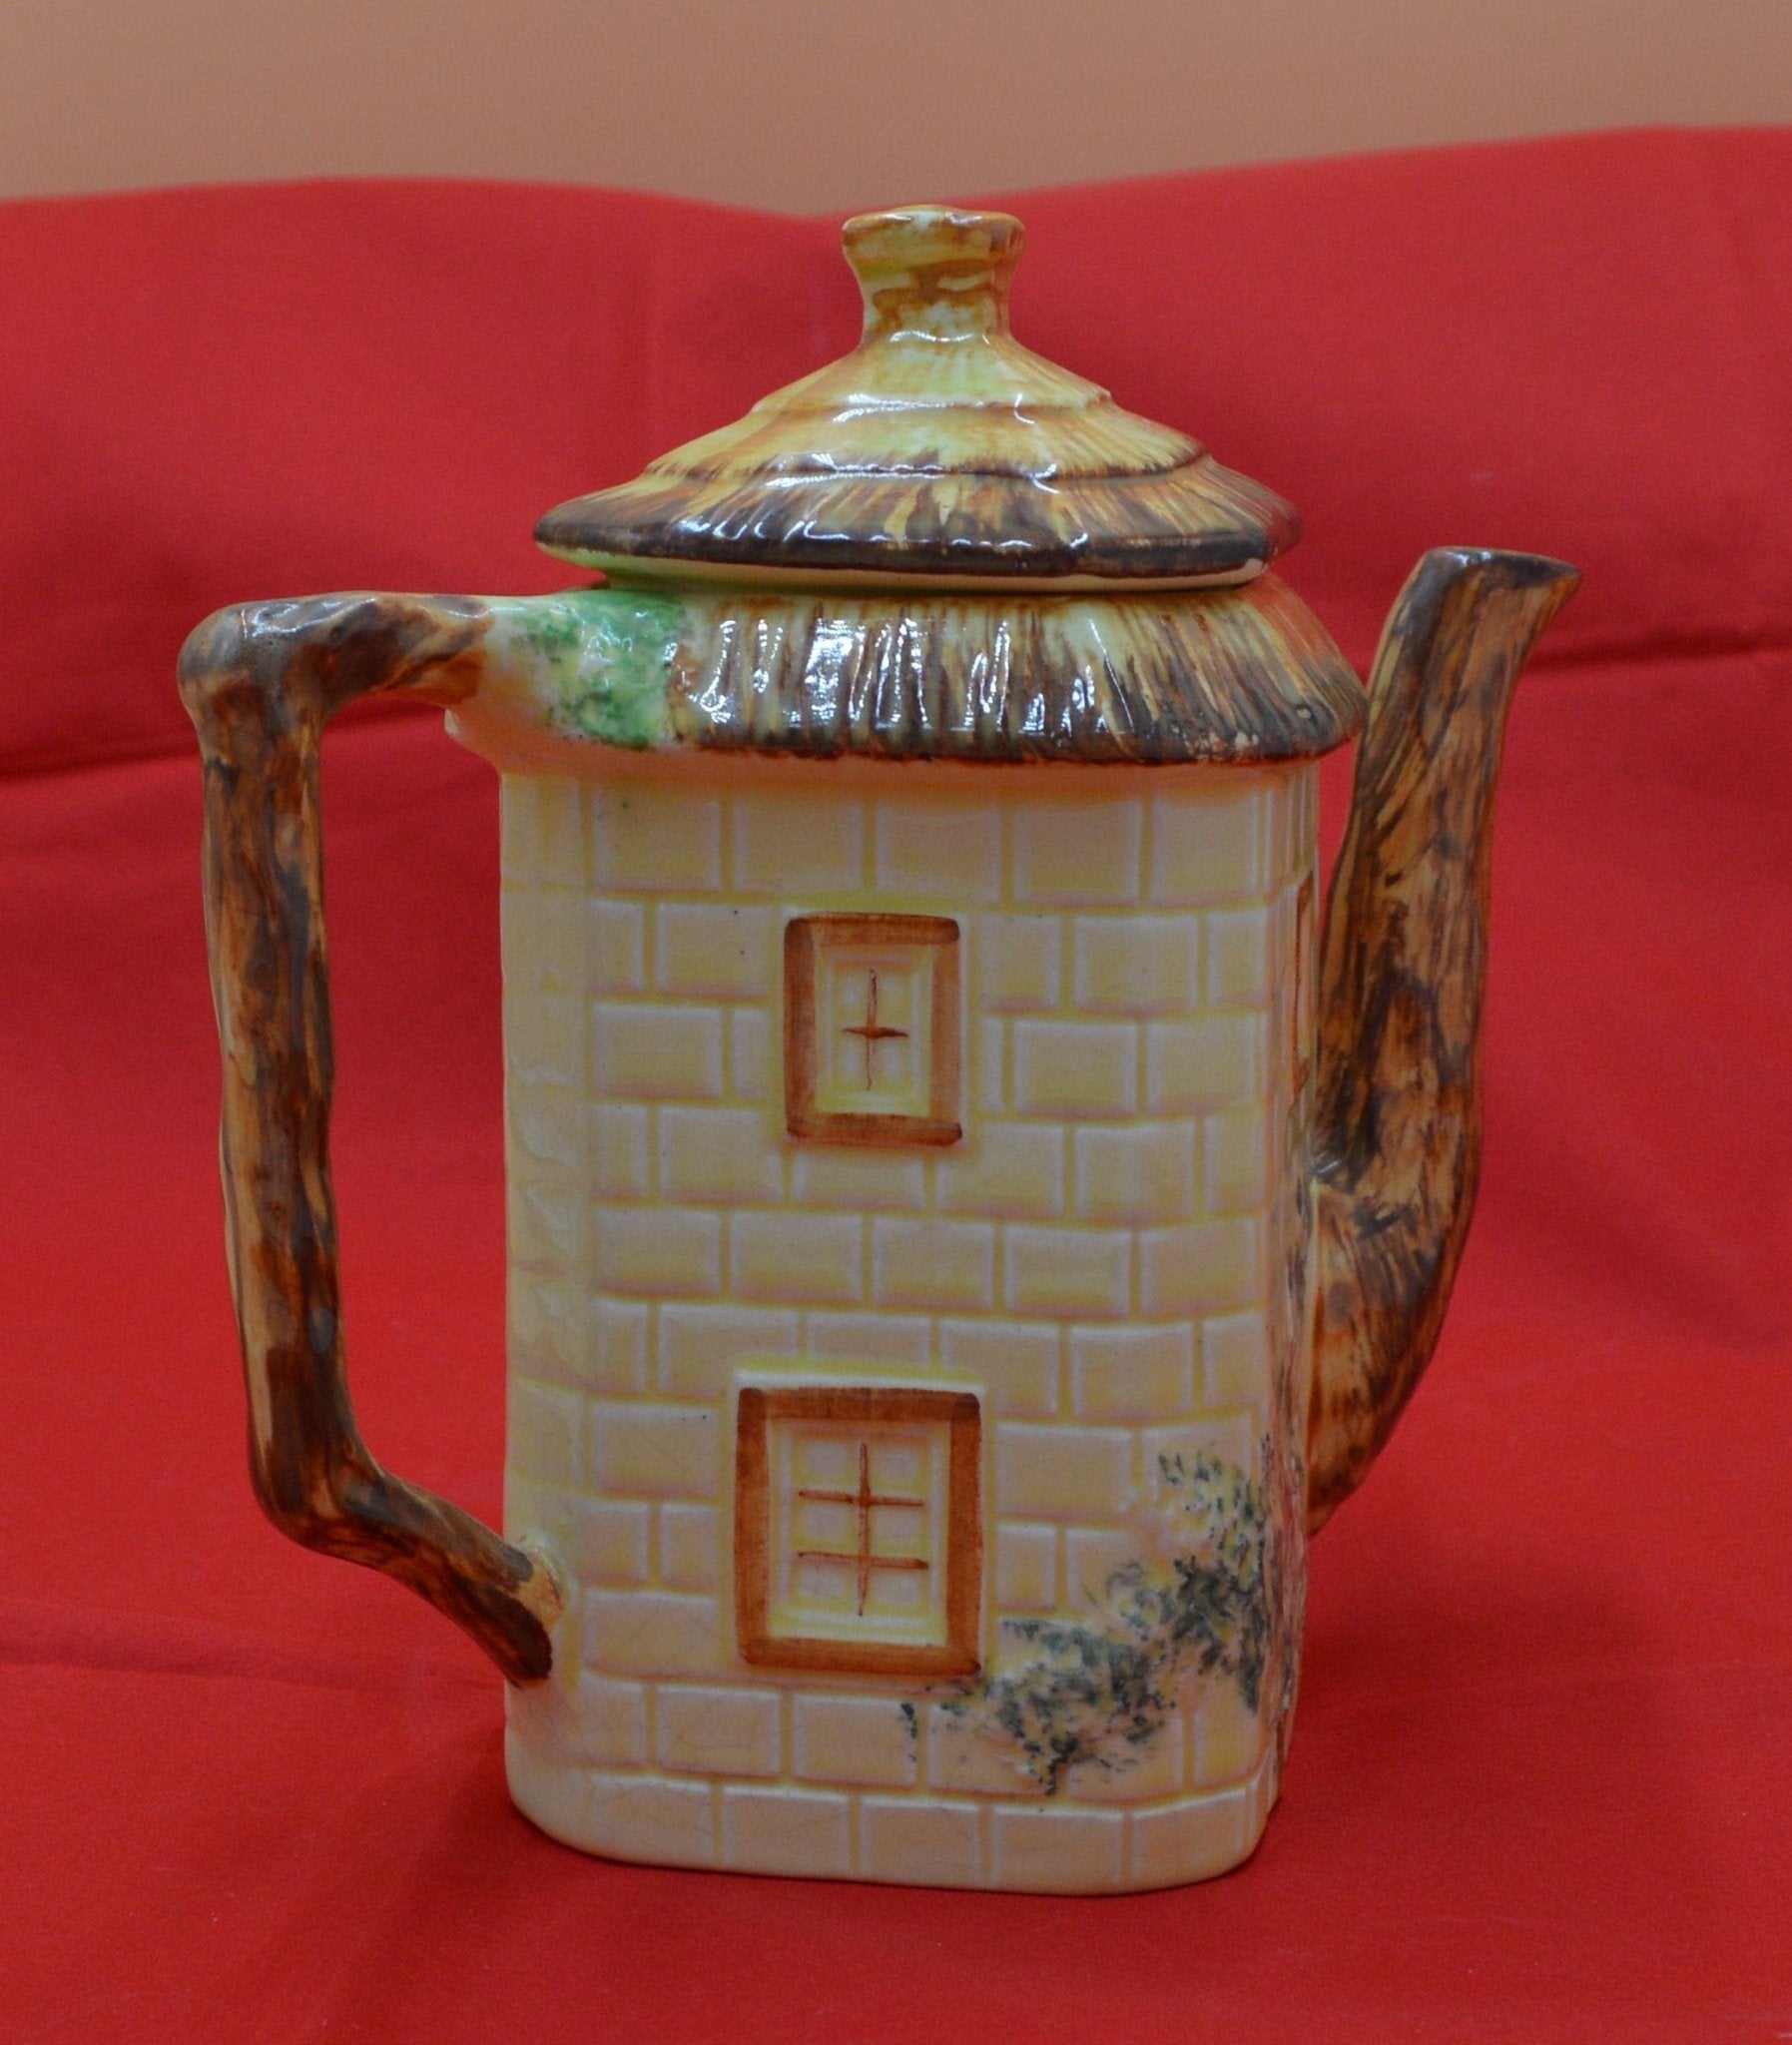 KEELE STREET POTTERY COTTAGEWARE TALL TEAPOT/COFFEE POT (PREVIOUSLY OWNED) GOOD CONDITION - TMD167207